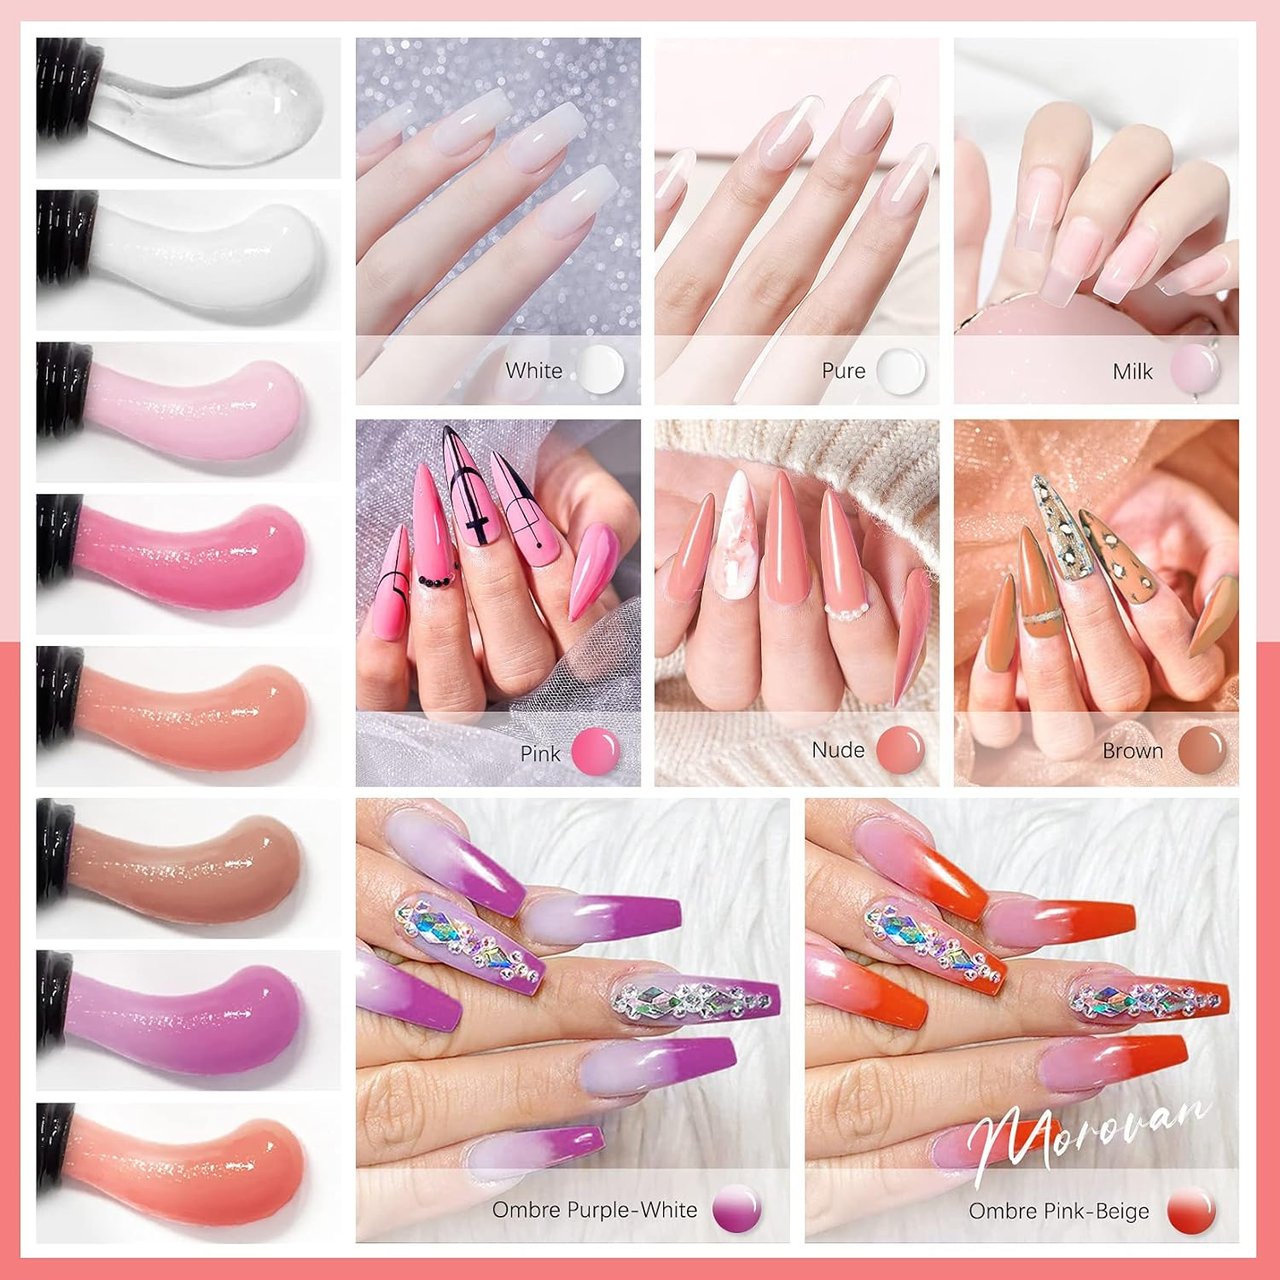 7 Morovan Poly Gel Nail Kit Builder Gel for Nails with 48W LED Nail Lamp Nail Extension Gel 8 Pcs 0.5oz with Slip Solution Nail Prep Dehydrator and Nail Primer Poly Nail Gel Kit Nail Art Supplies